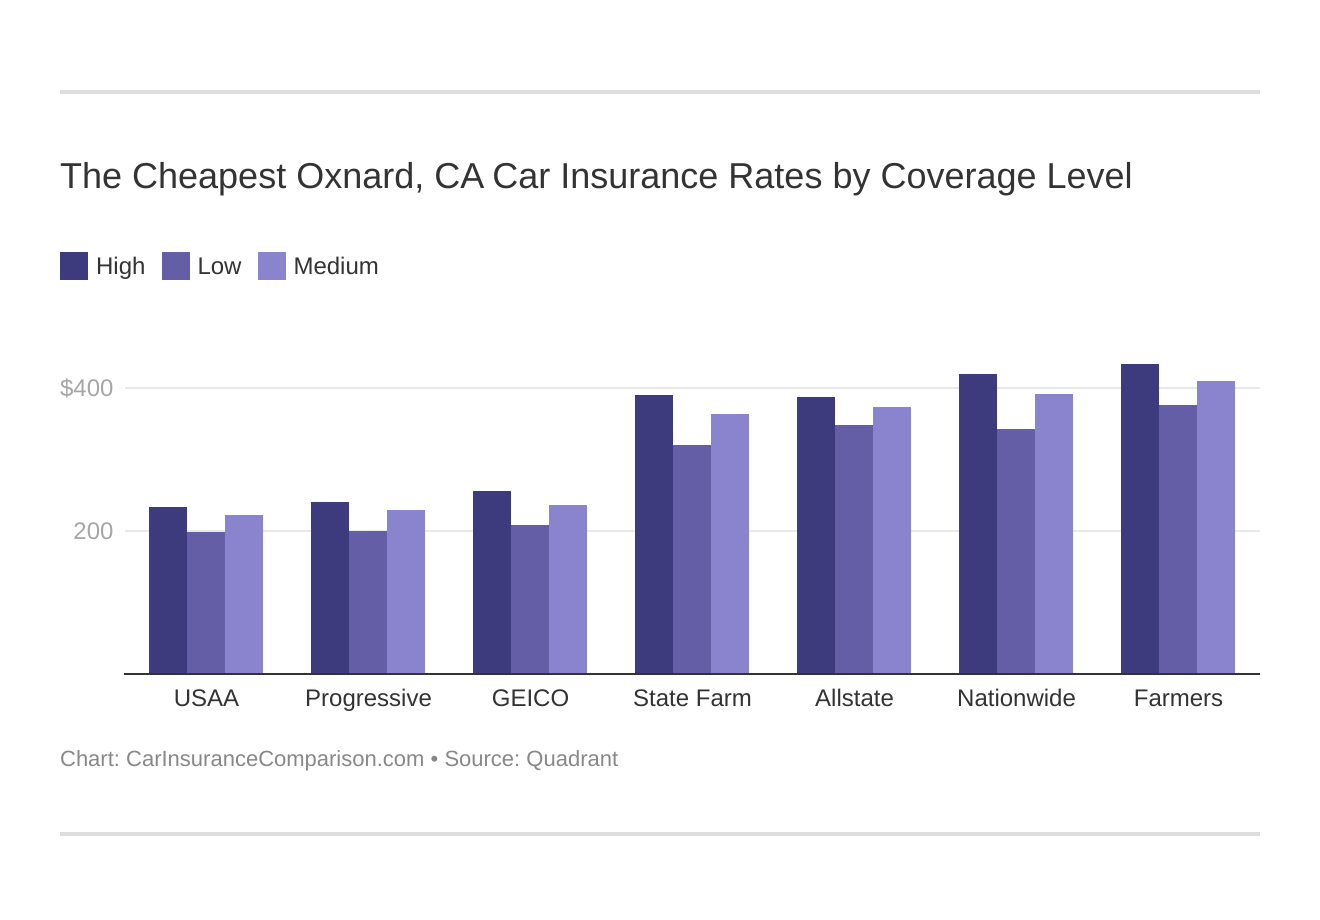 The Cheapest Oxnard, CA Car Insurance Rates by Coverage Level